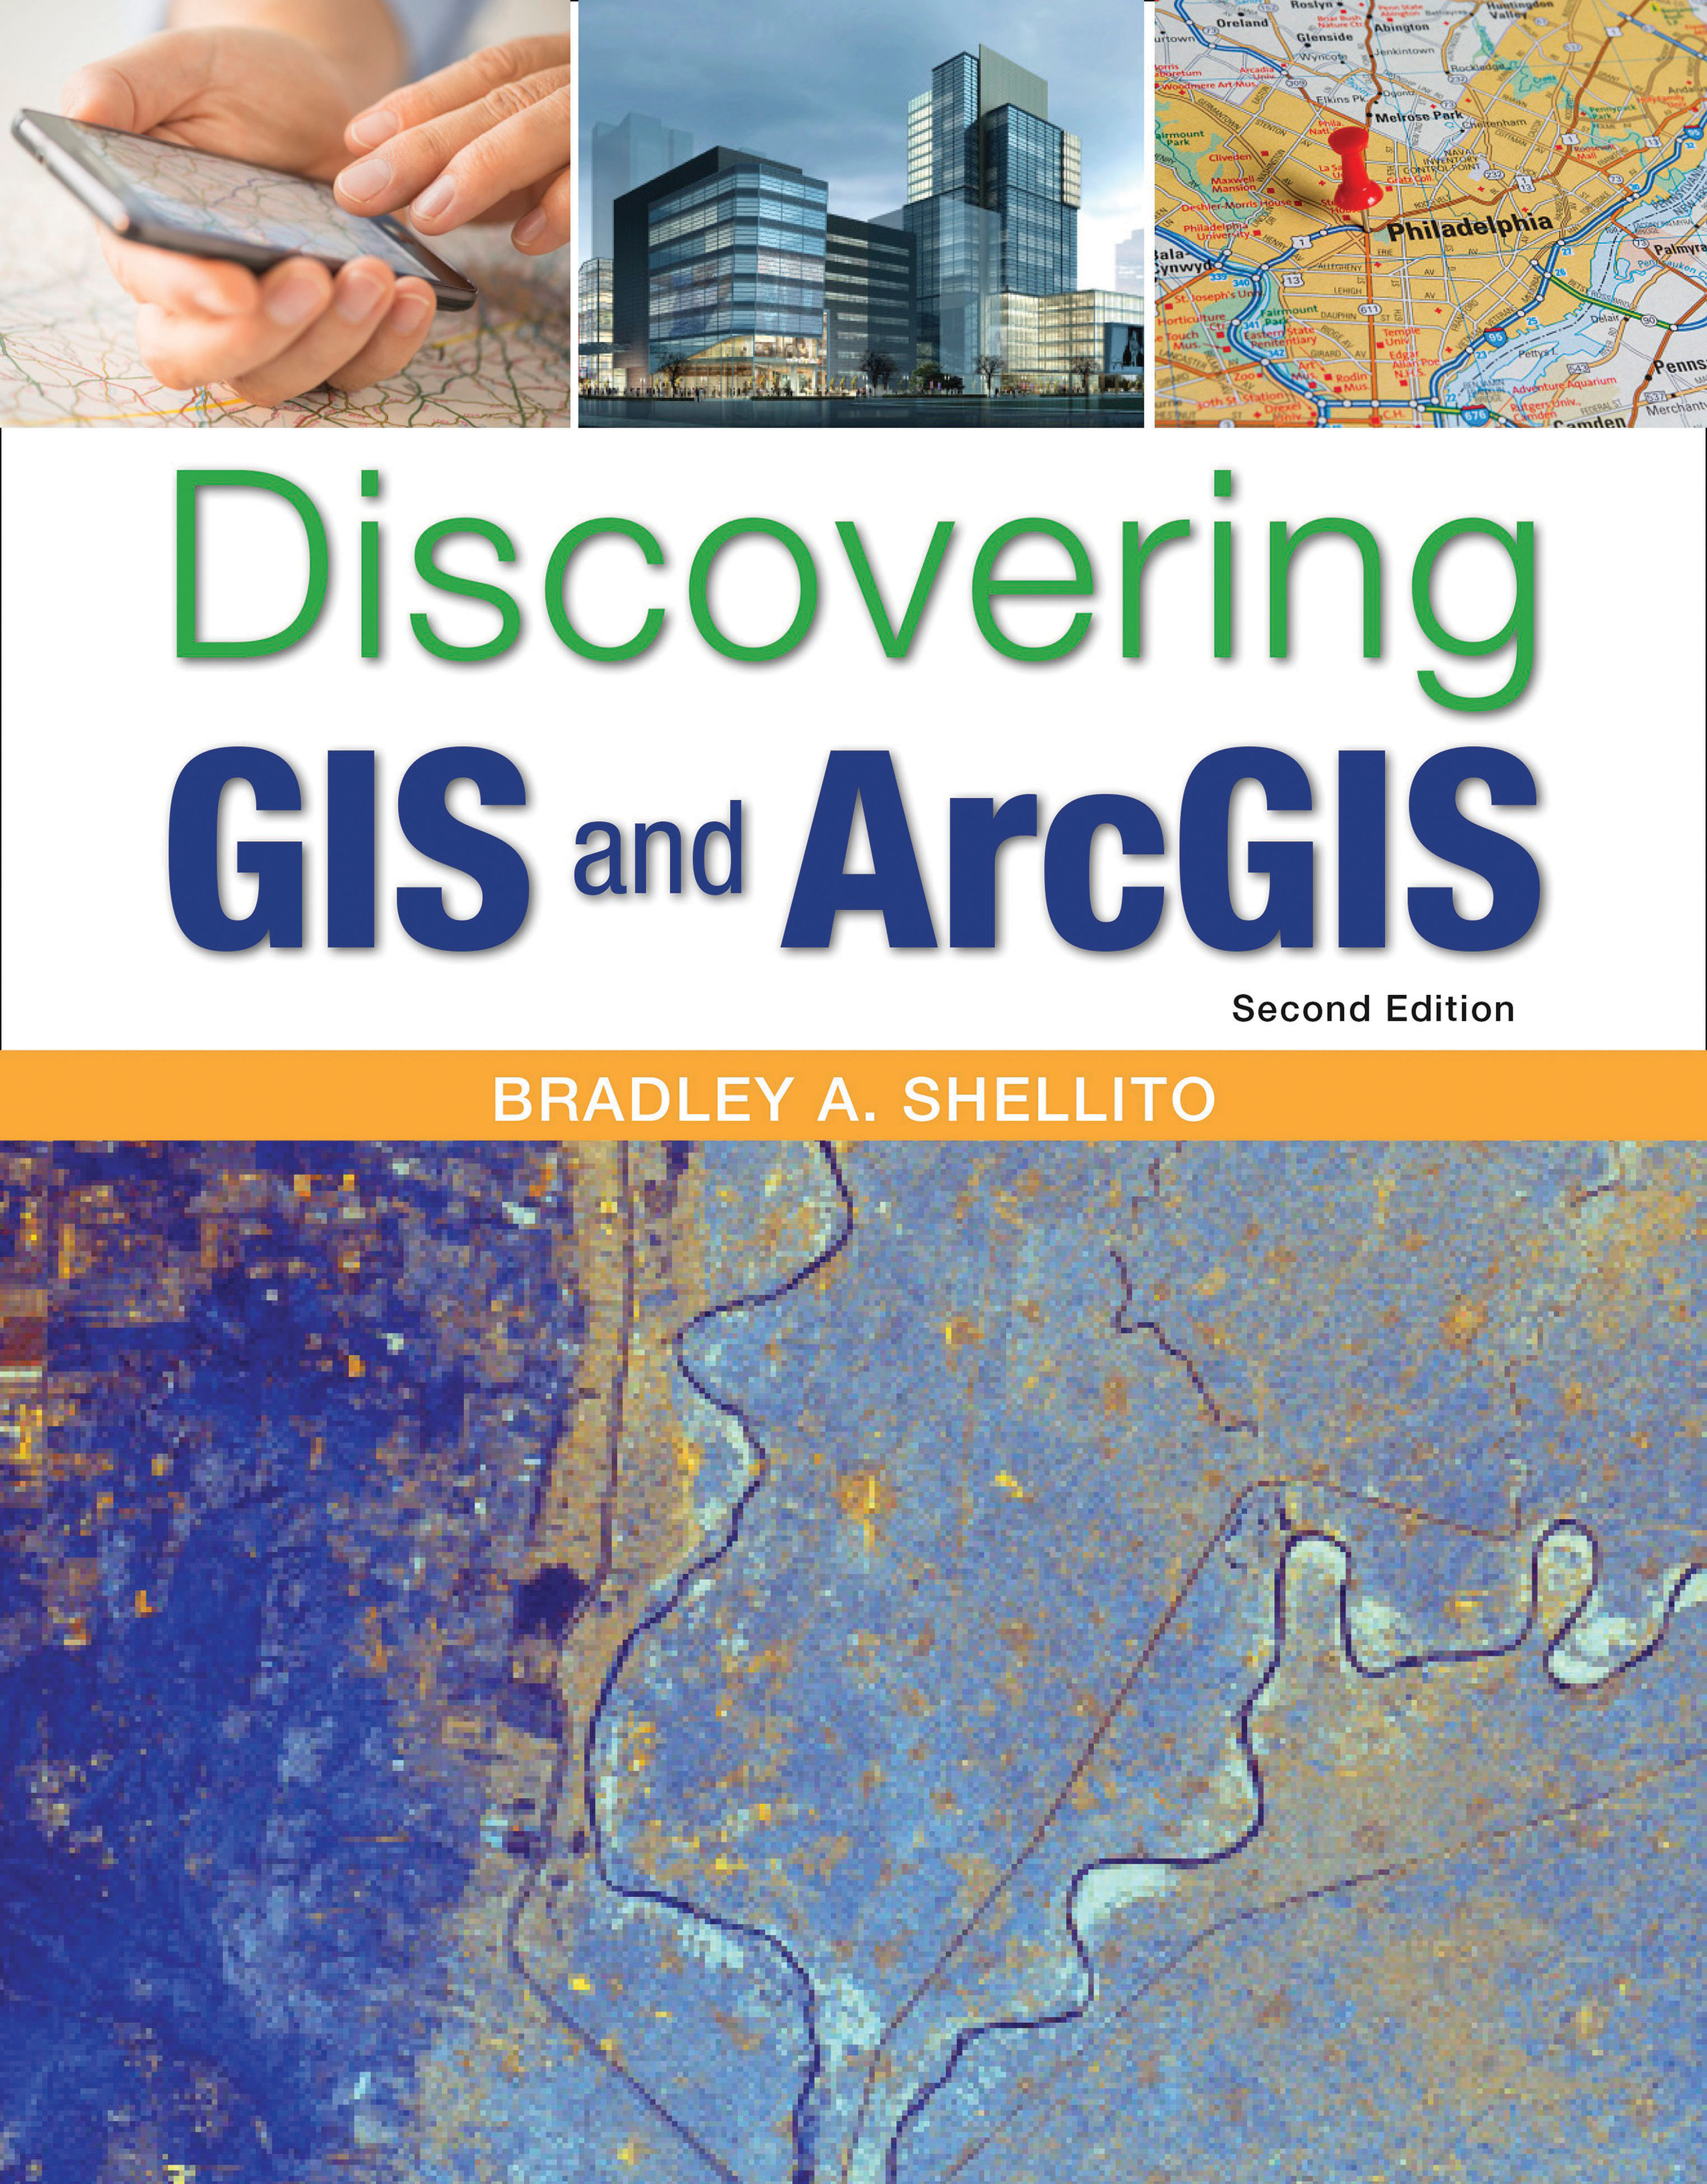 Discovering GIS and ArcGIS, Second edition, by Bradley Shellito, professor, Geography